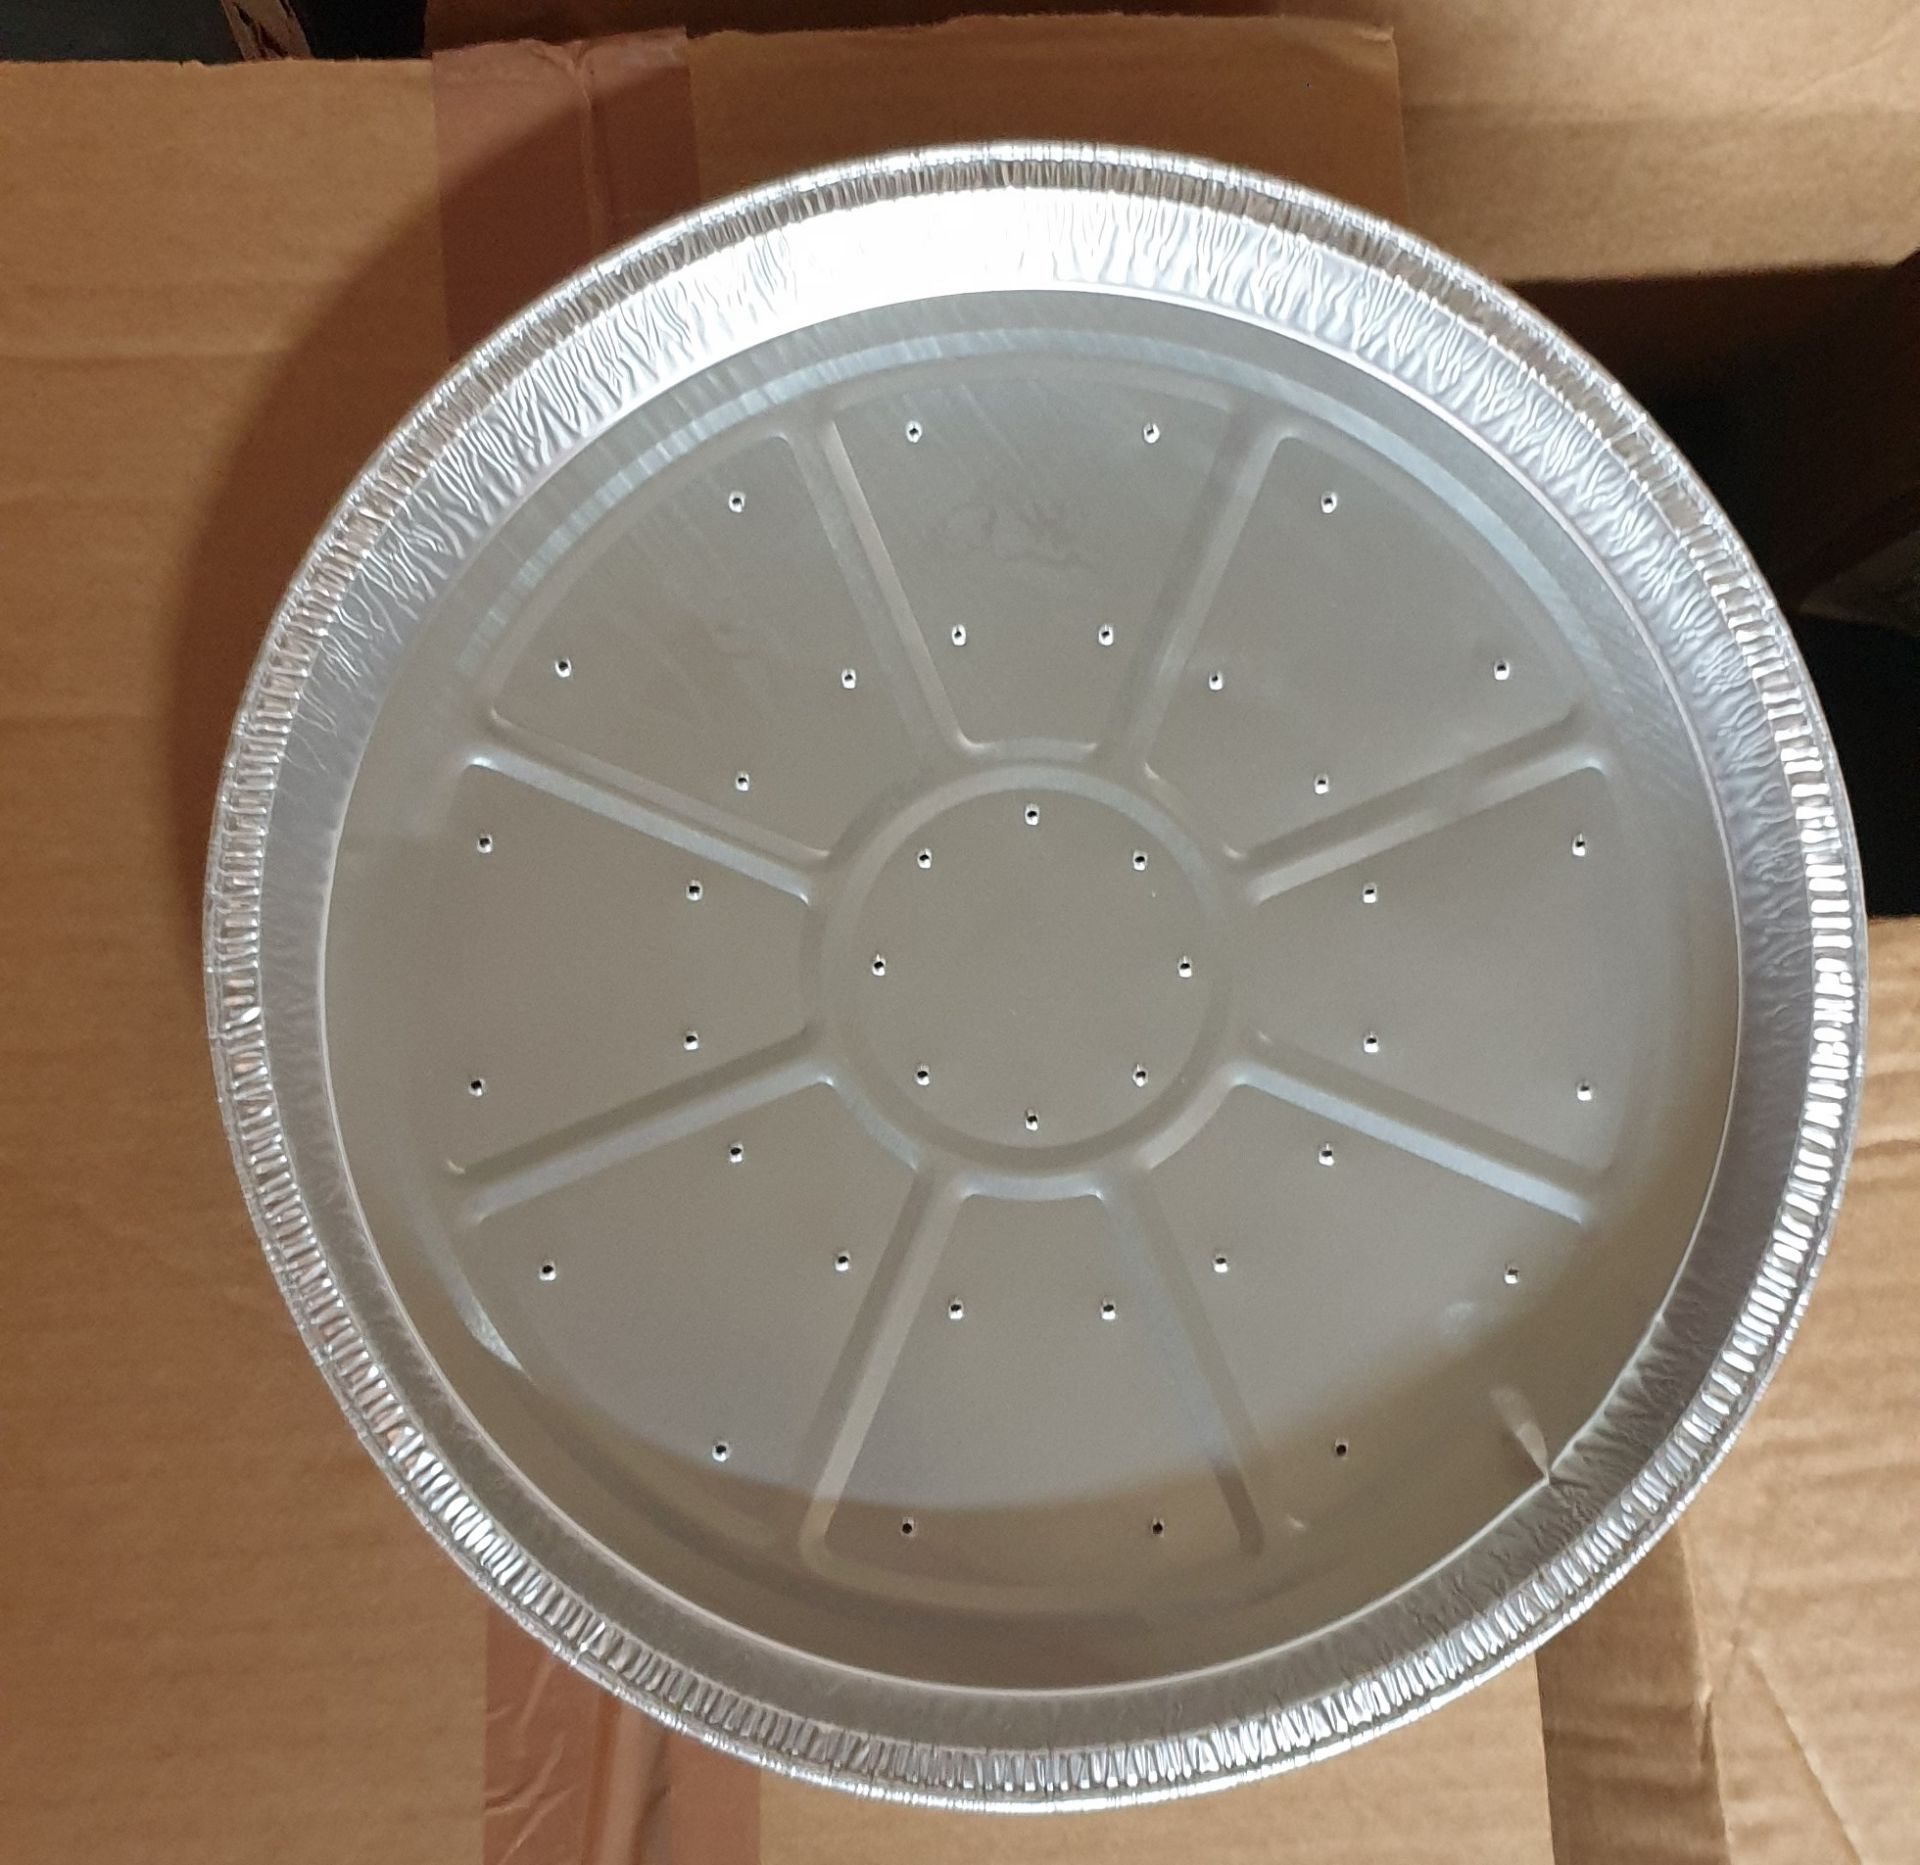 Approx 130 Boxes x 110 Round Pie/Quiche Foil Dishes, Approx 11 inches diameter